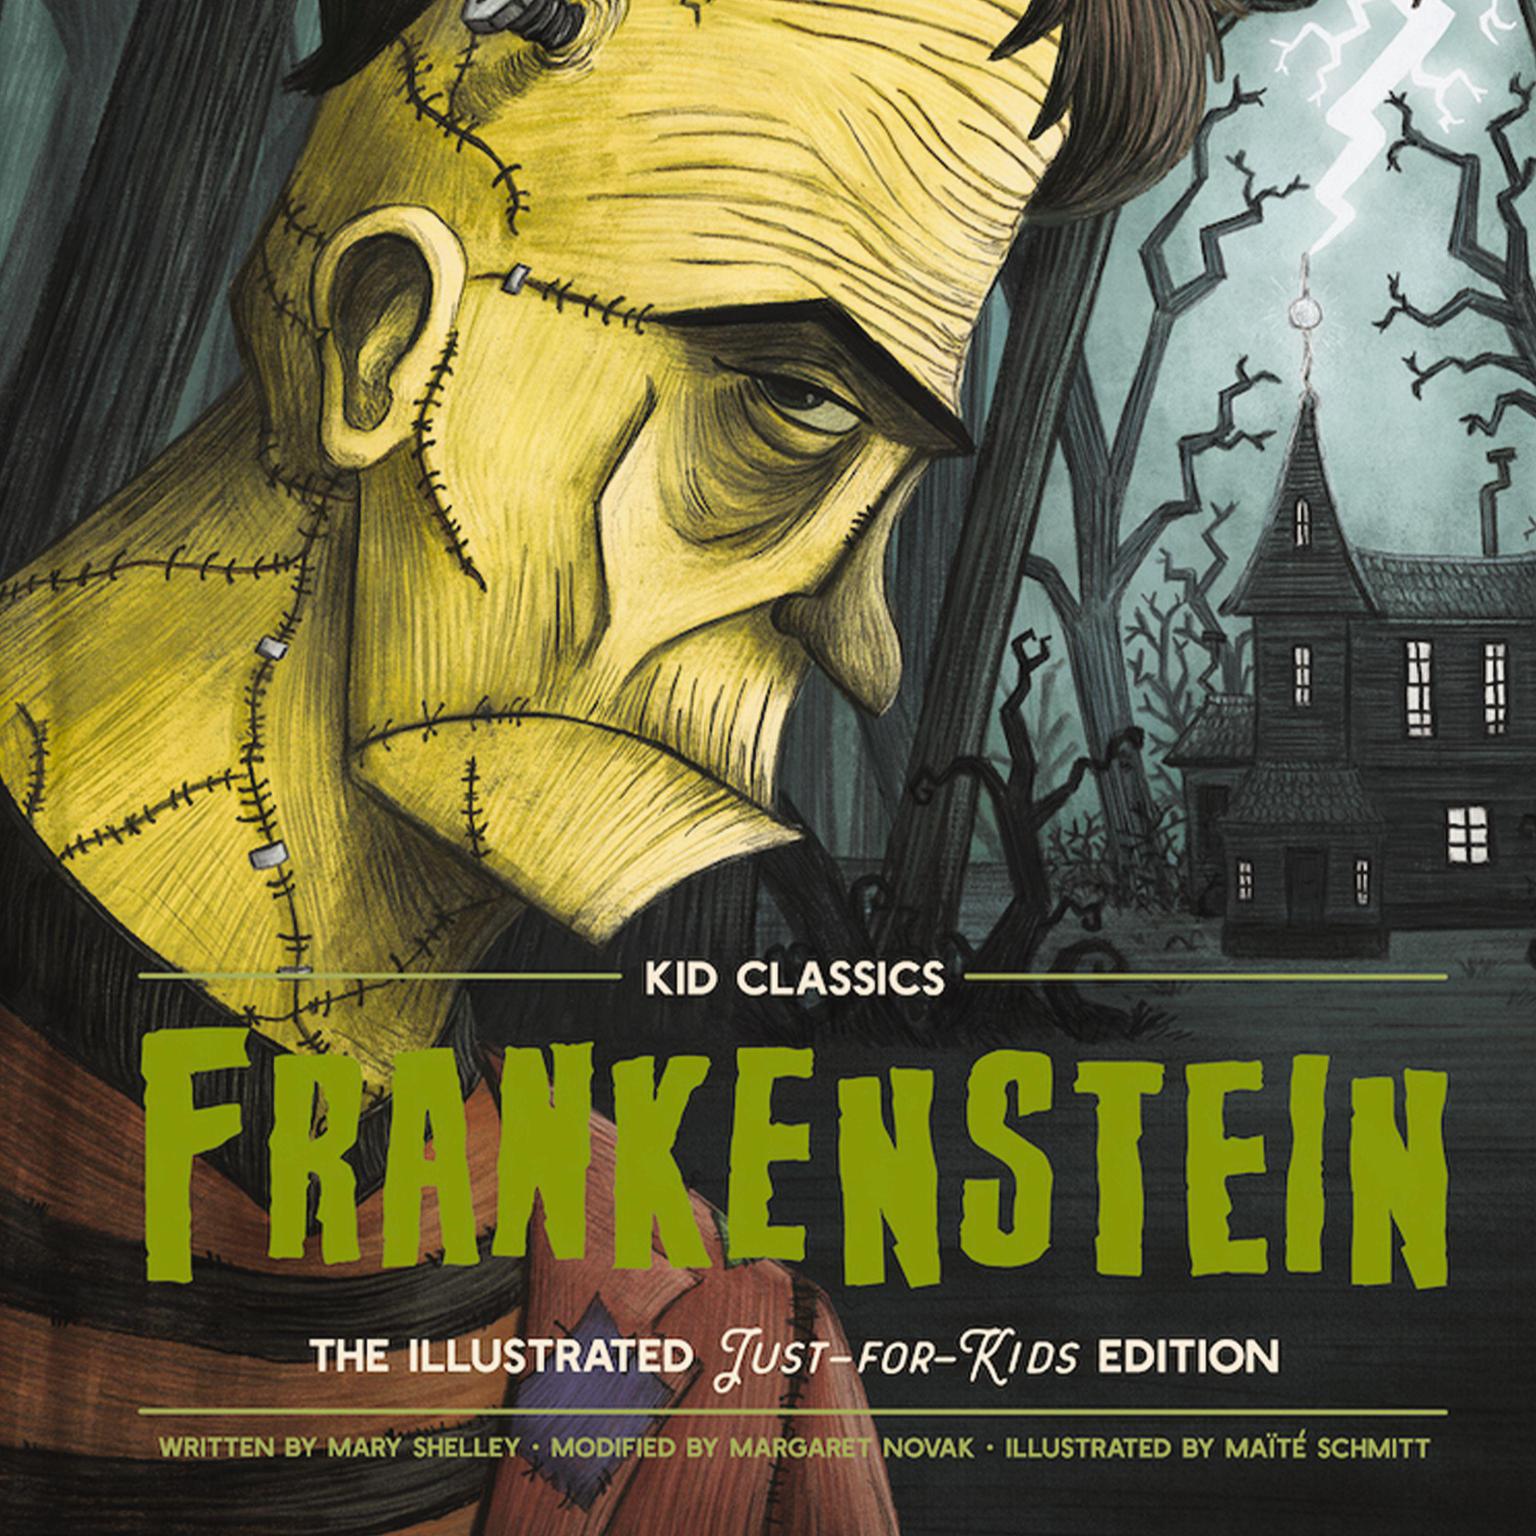 Frankenstein - Kid Classics (Abridged): The Classic Edition Reimagined Just-for-Kids! Audiobook, by Mary Shelley